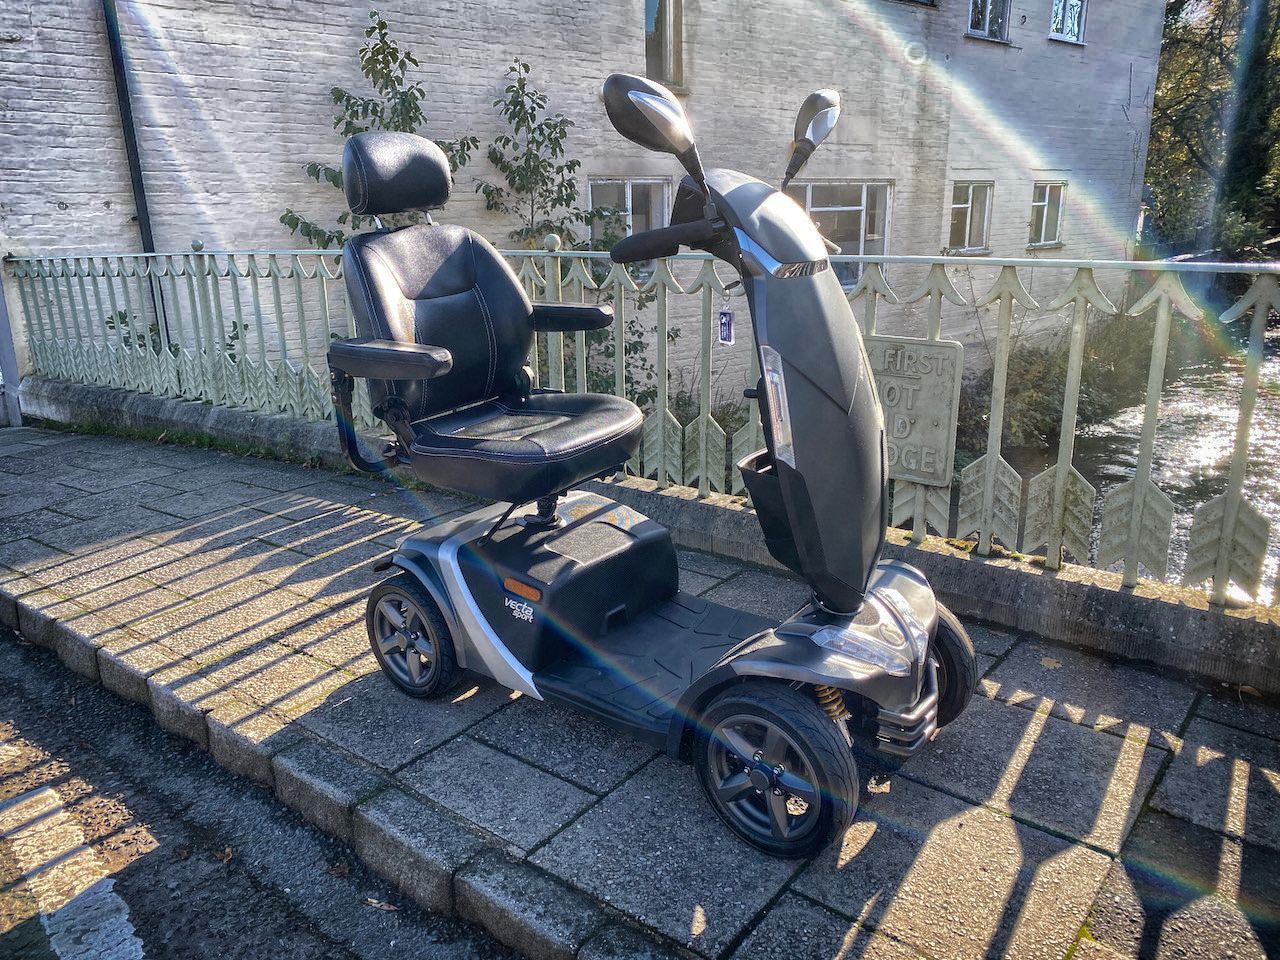 Rascal Vecta Sport Compact Used Electric Mobility Scooter 8mph Max Grip Suspension